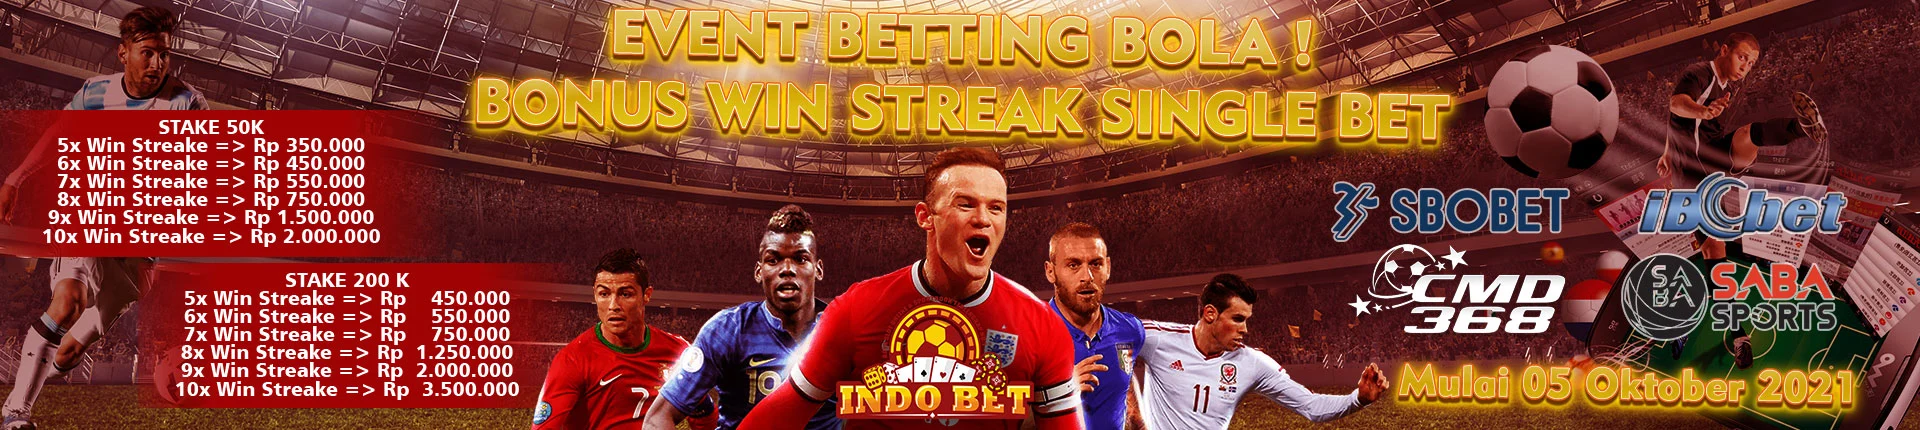 Event Betting Bola Indobet